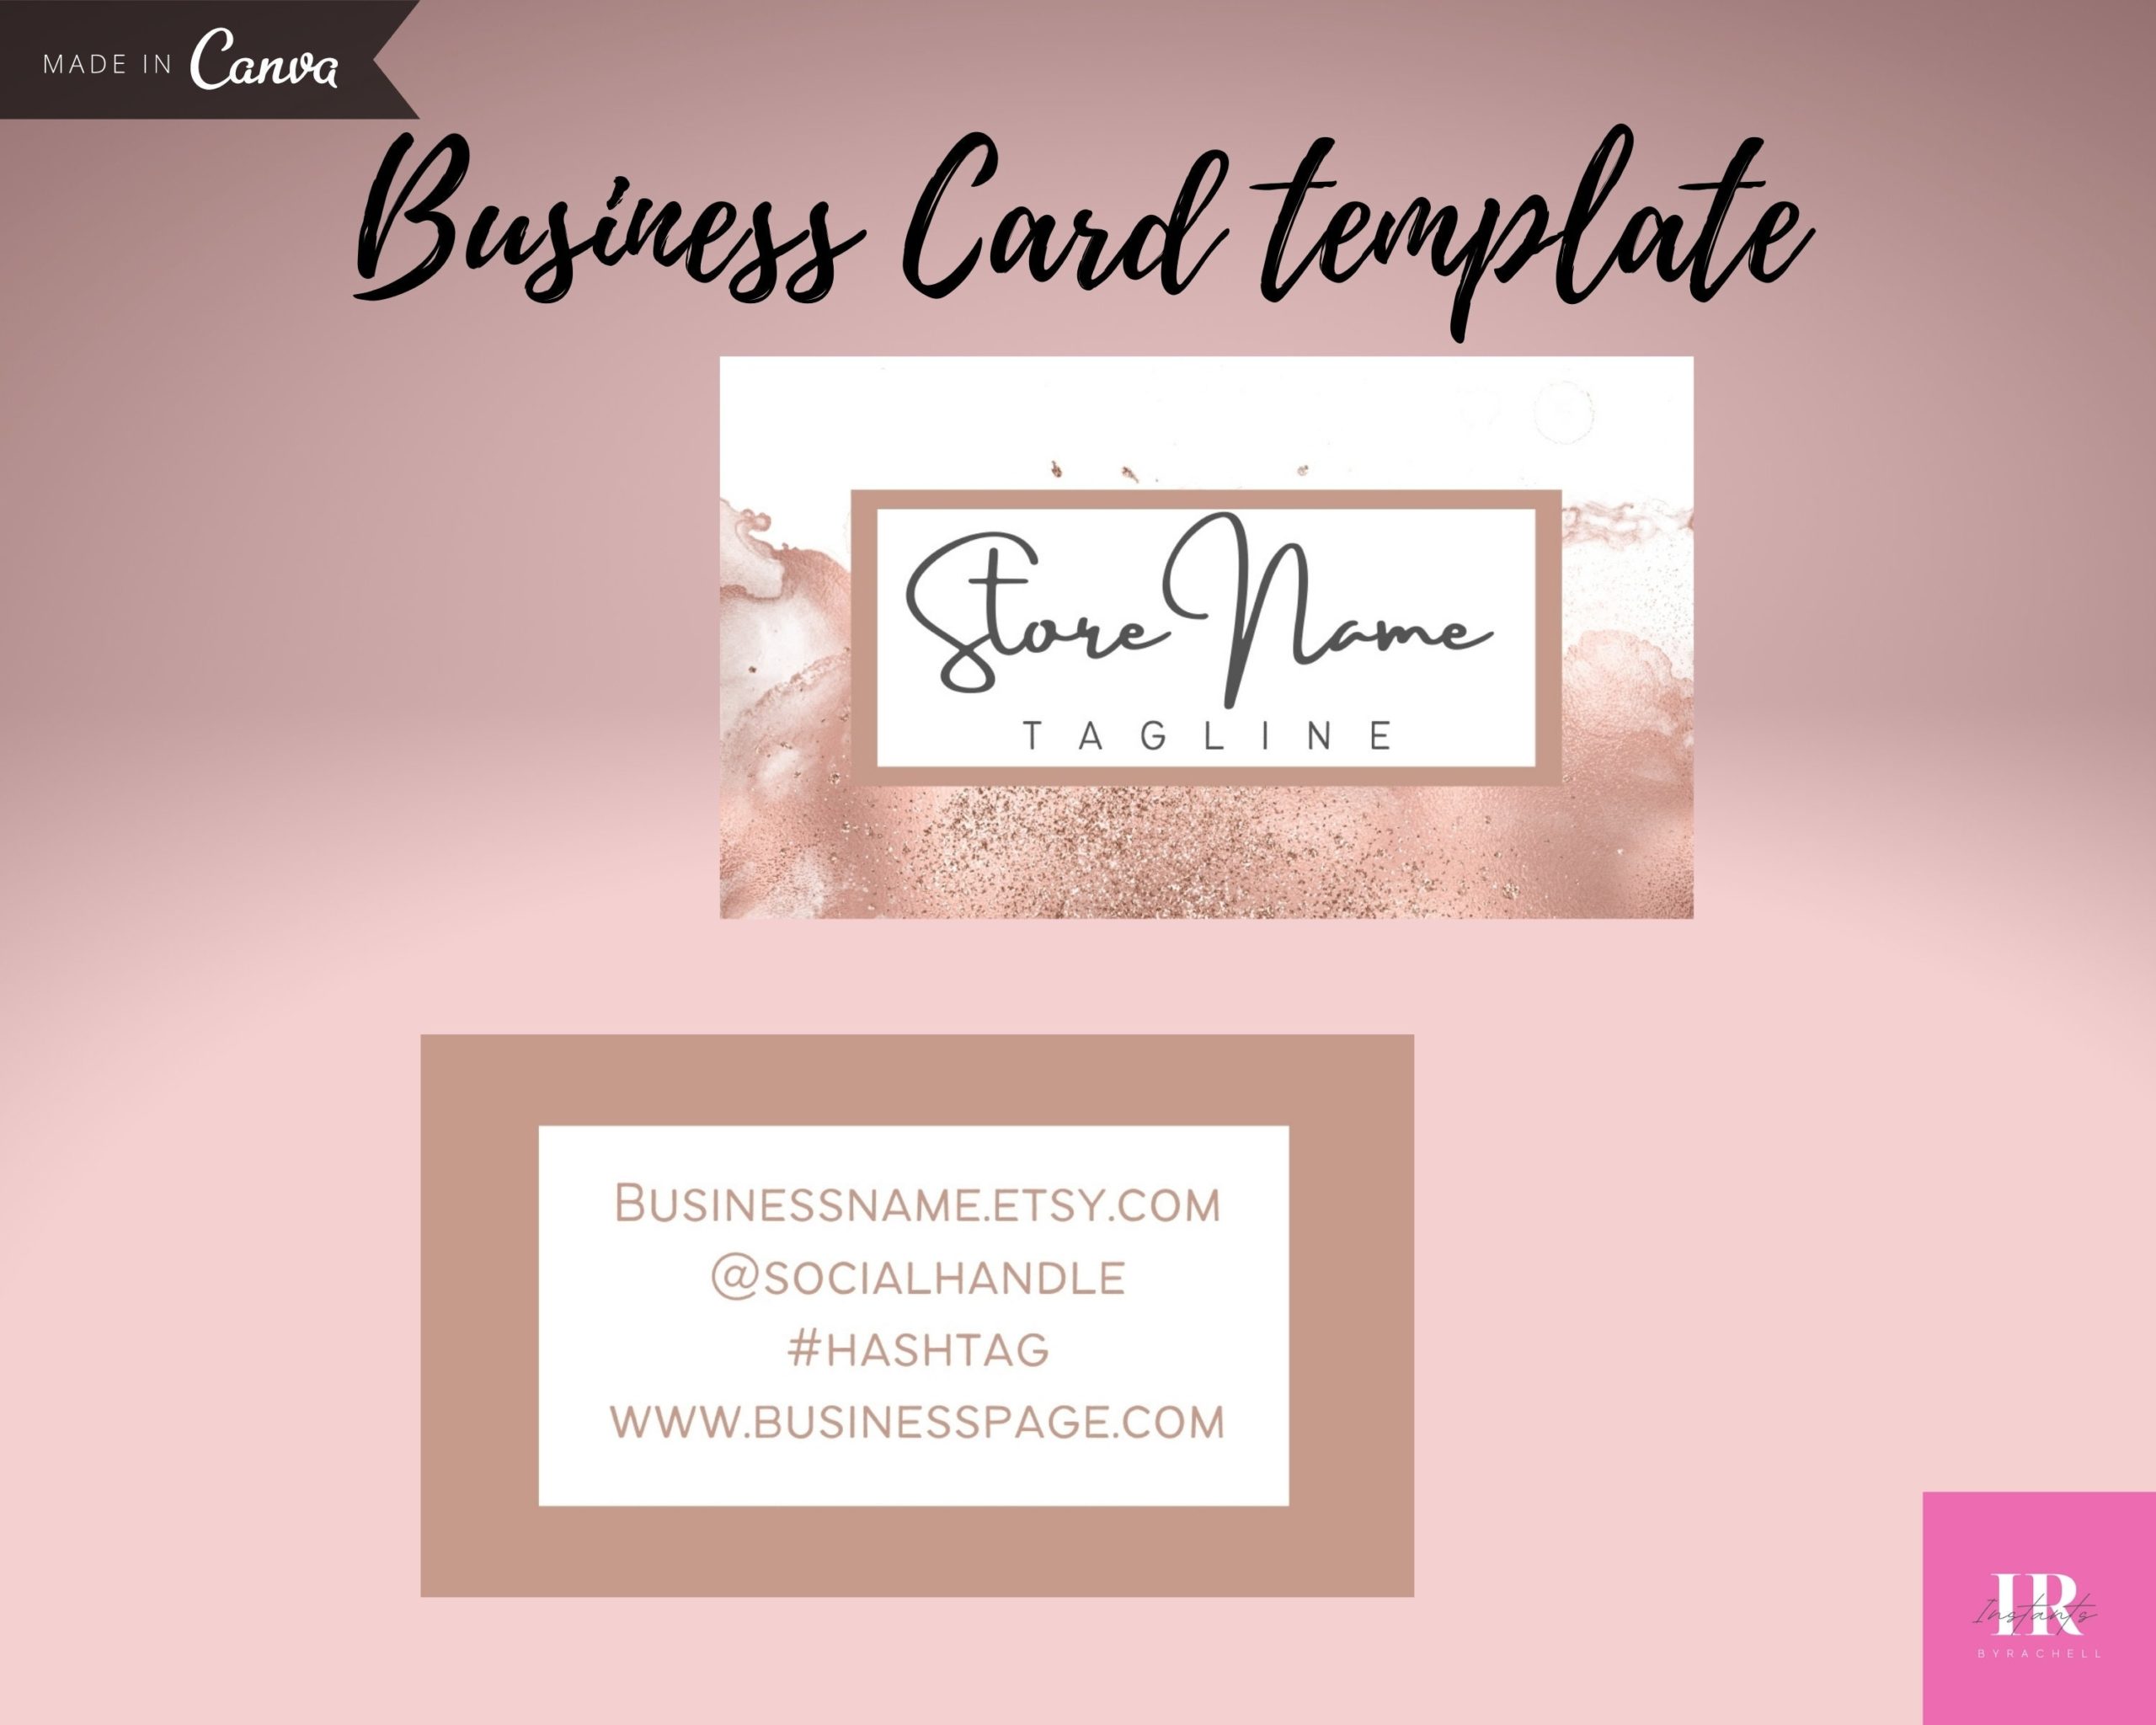 candle company business cards 3